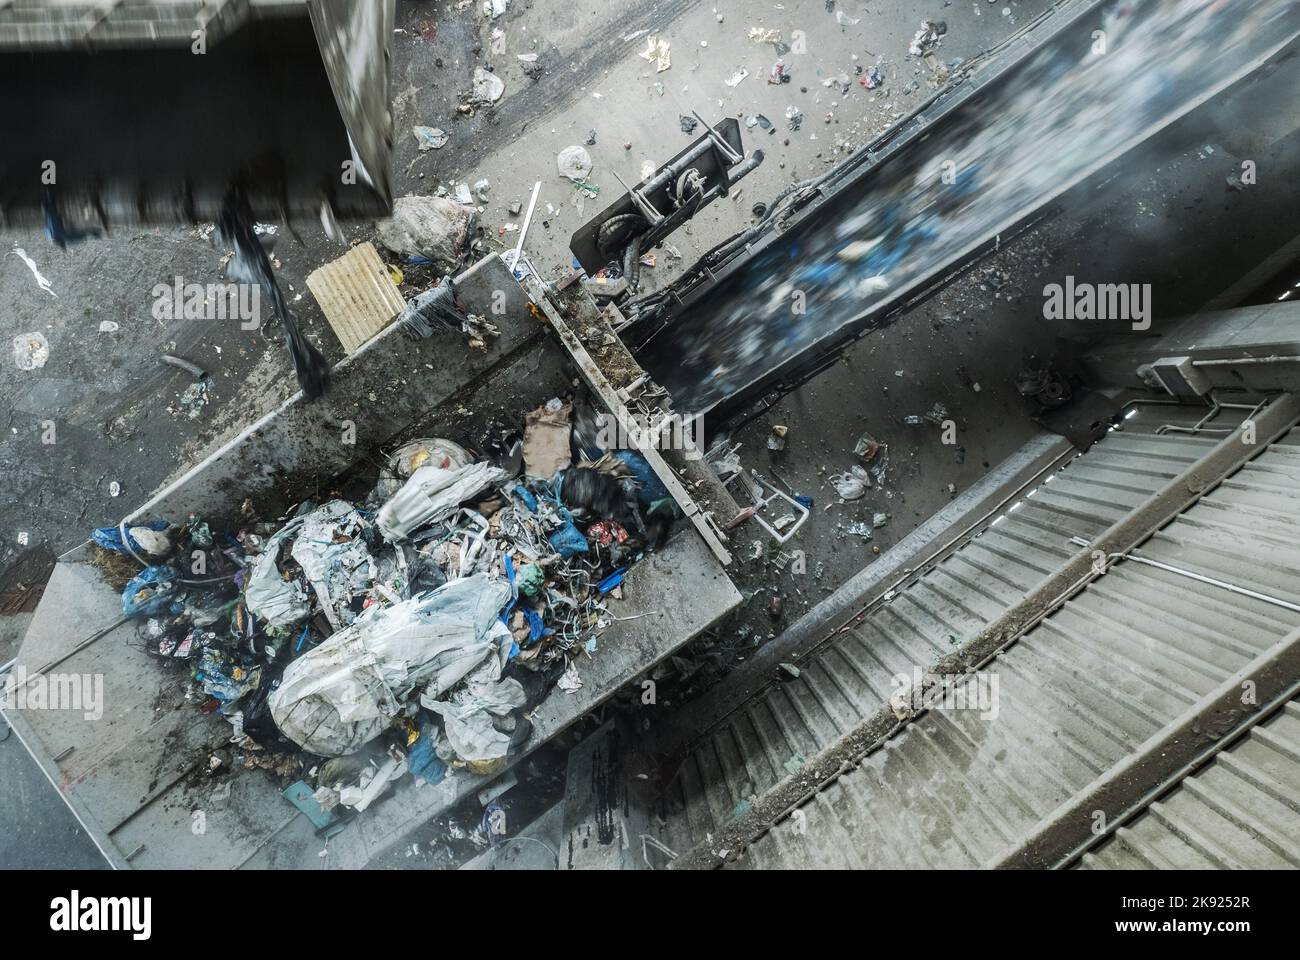 Waste Processing Machine Shredding Trash at the Garbage Treatment Plant. Aerial View. Pollution Control Theme. Stock Photo